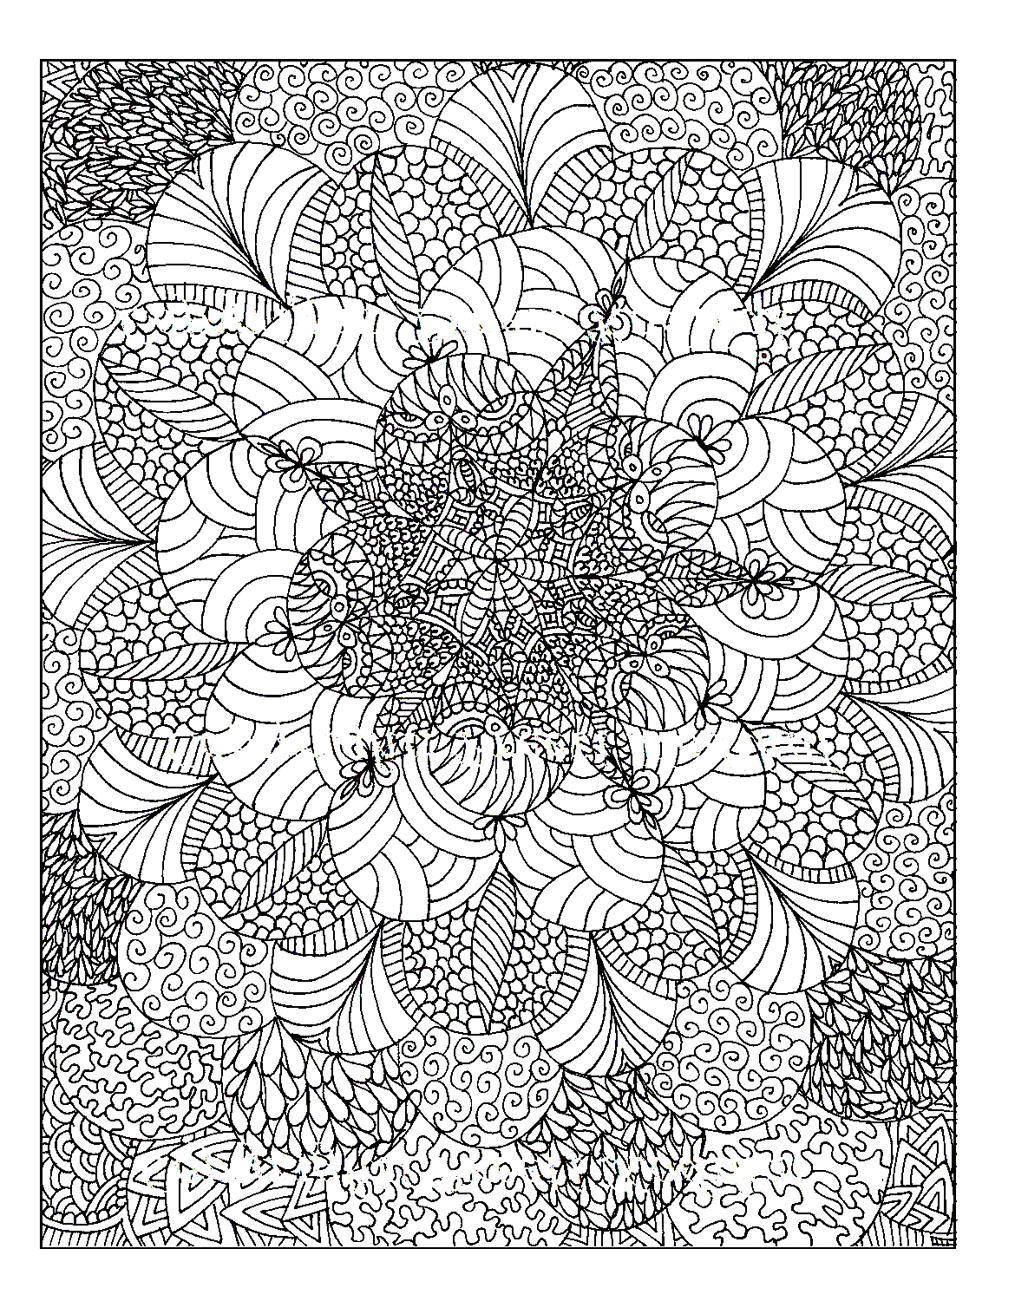 Coloring Beautiful patterns. Category coloring antistress. Tags:  Patterns, flower.